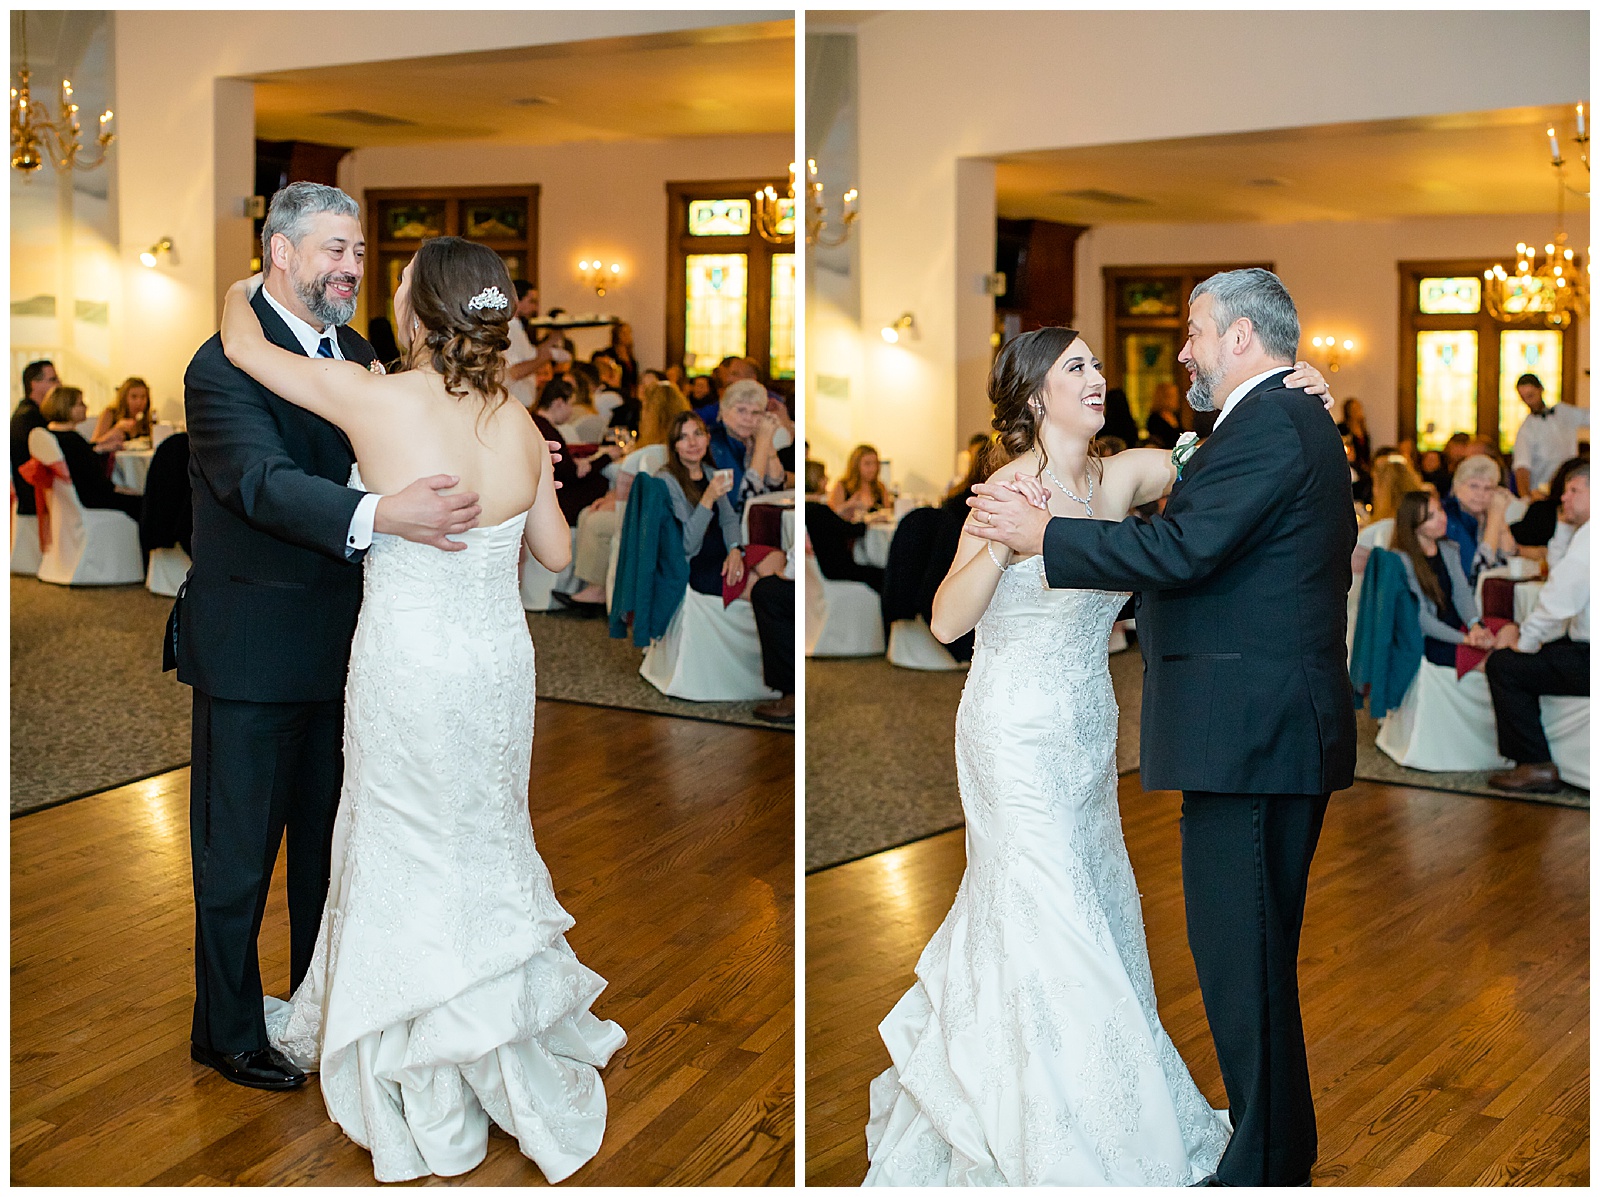 Father and daughter wedding dance at The Camelot Banquet Hall